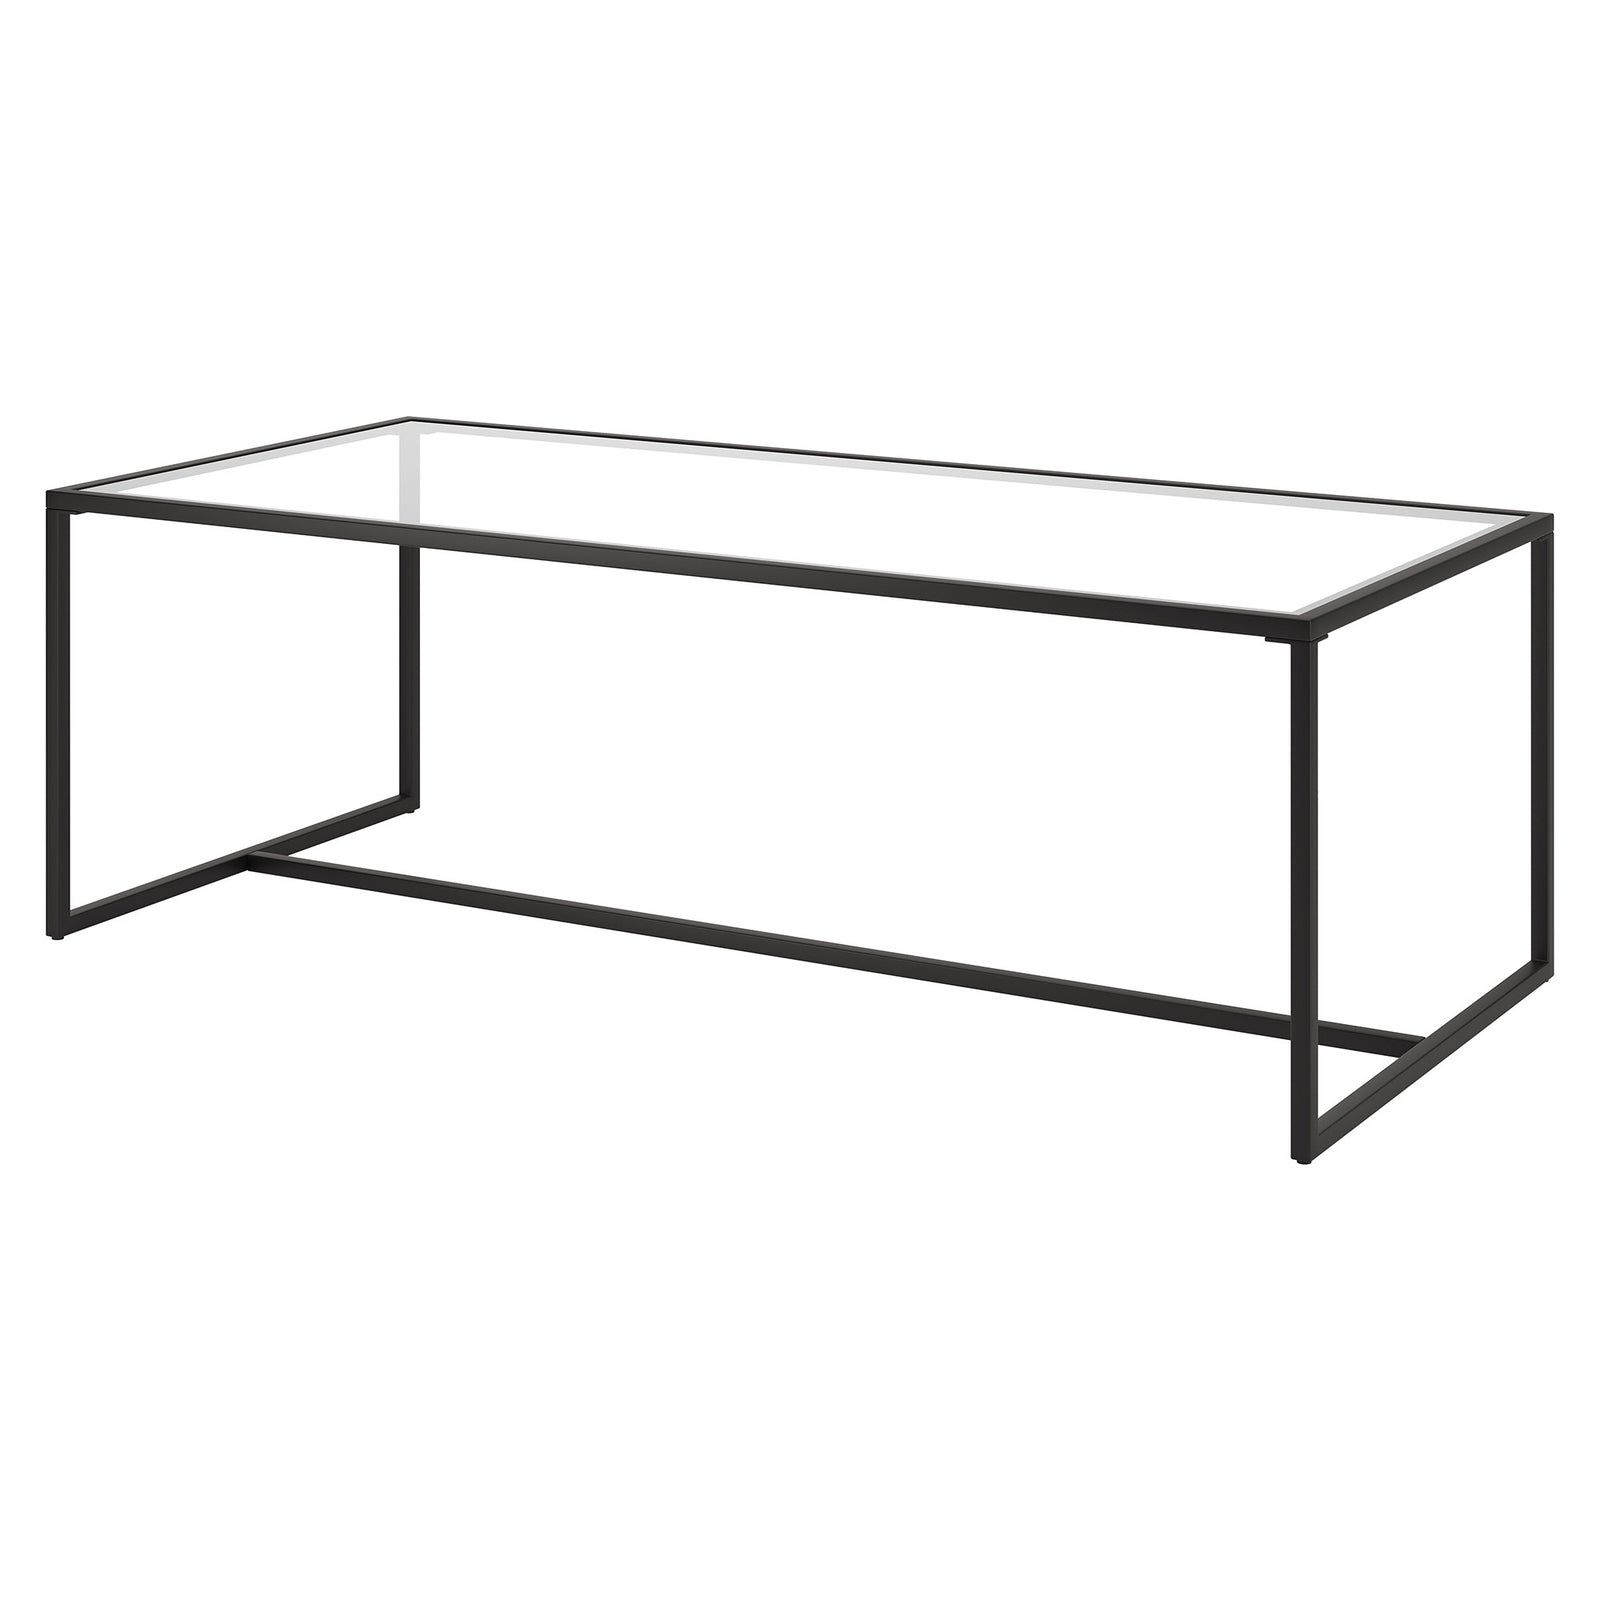 47" Black and Glass Rectangular Sled Base Coffee Table